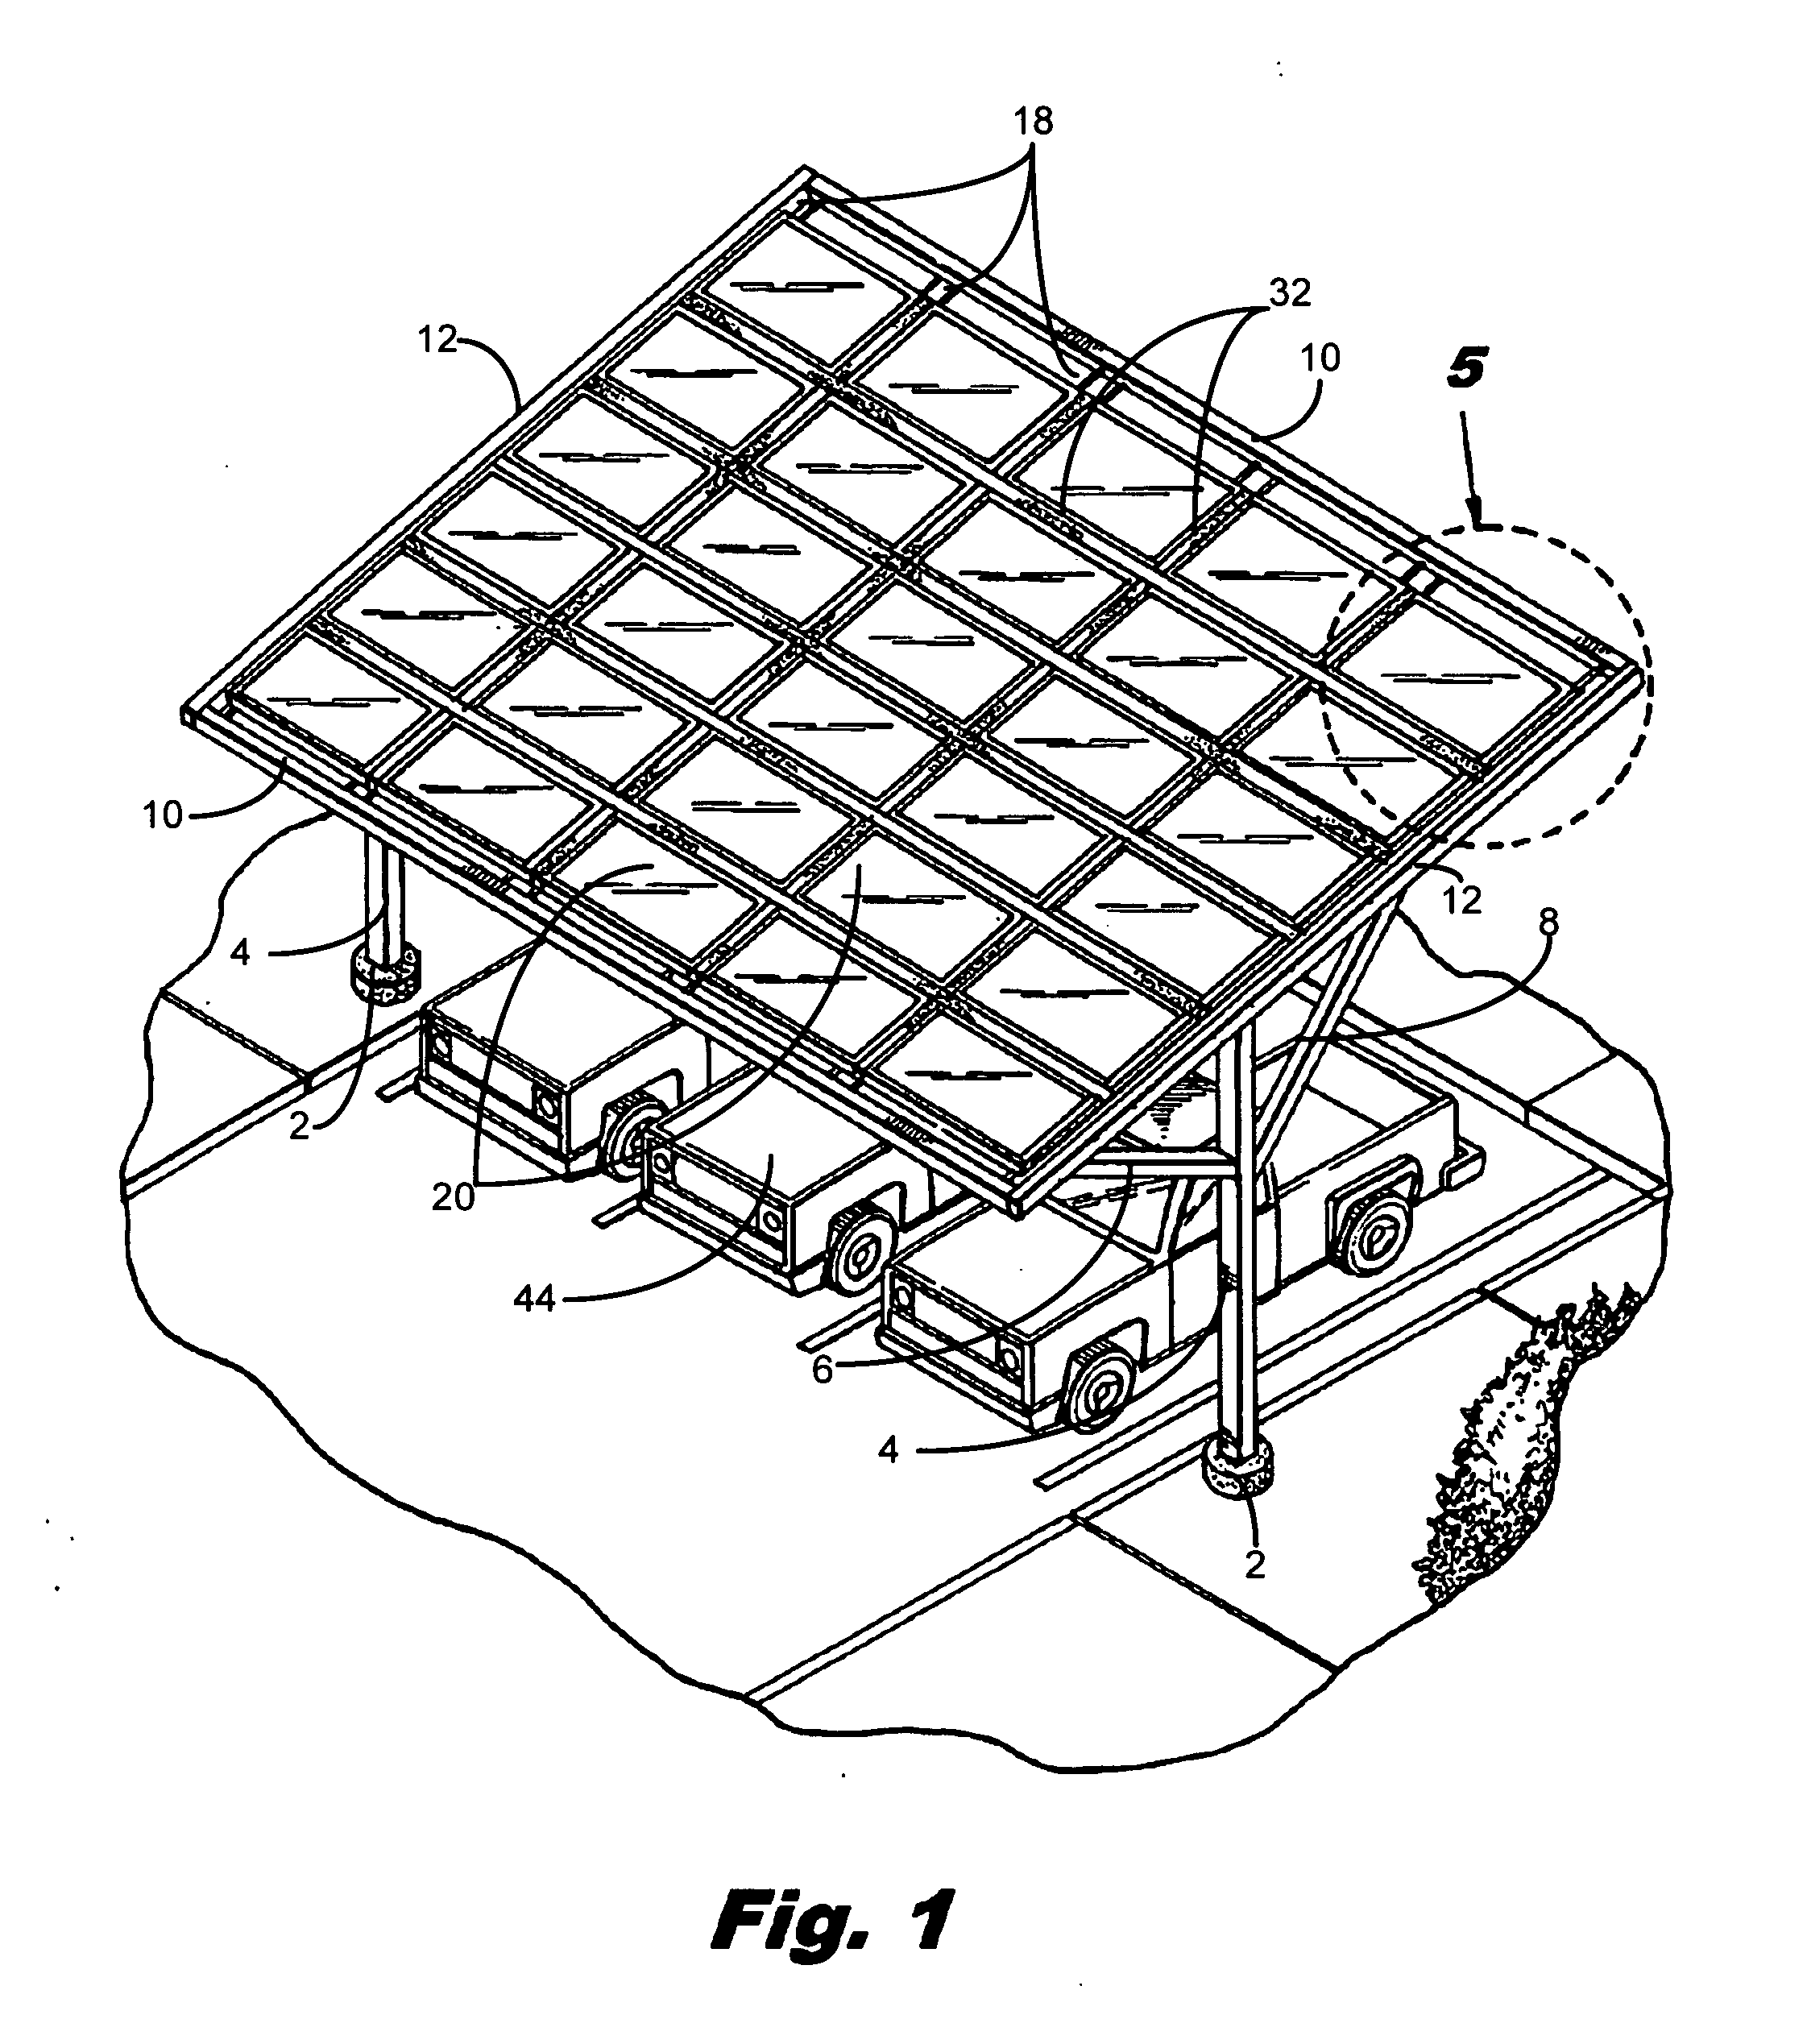 Cabled matrix for cantilevered photovoltaic solar panel arrays, apparatus and deployment systems